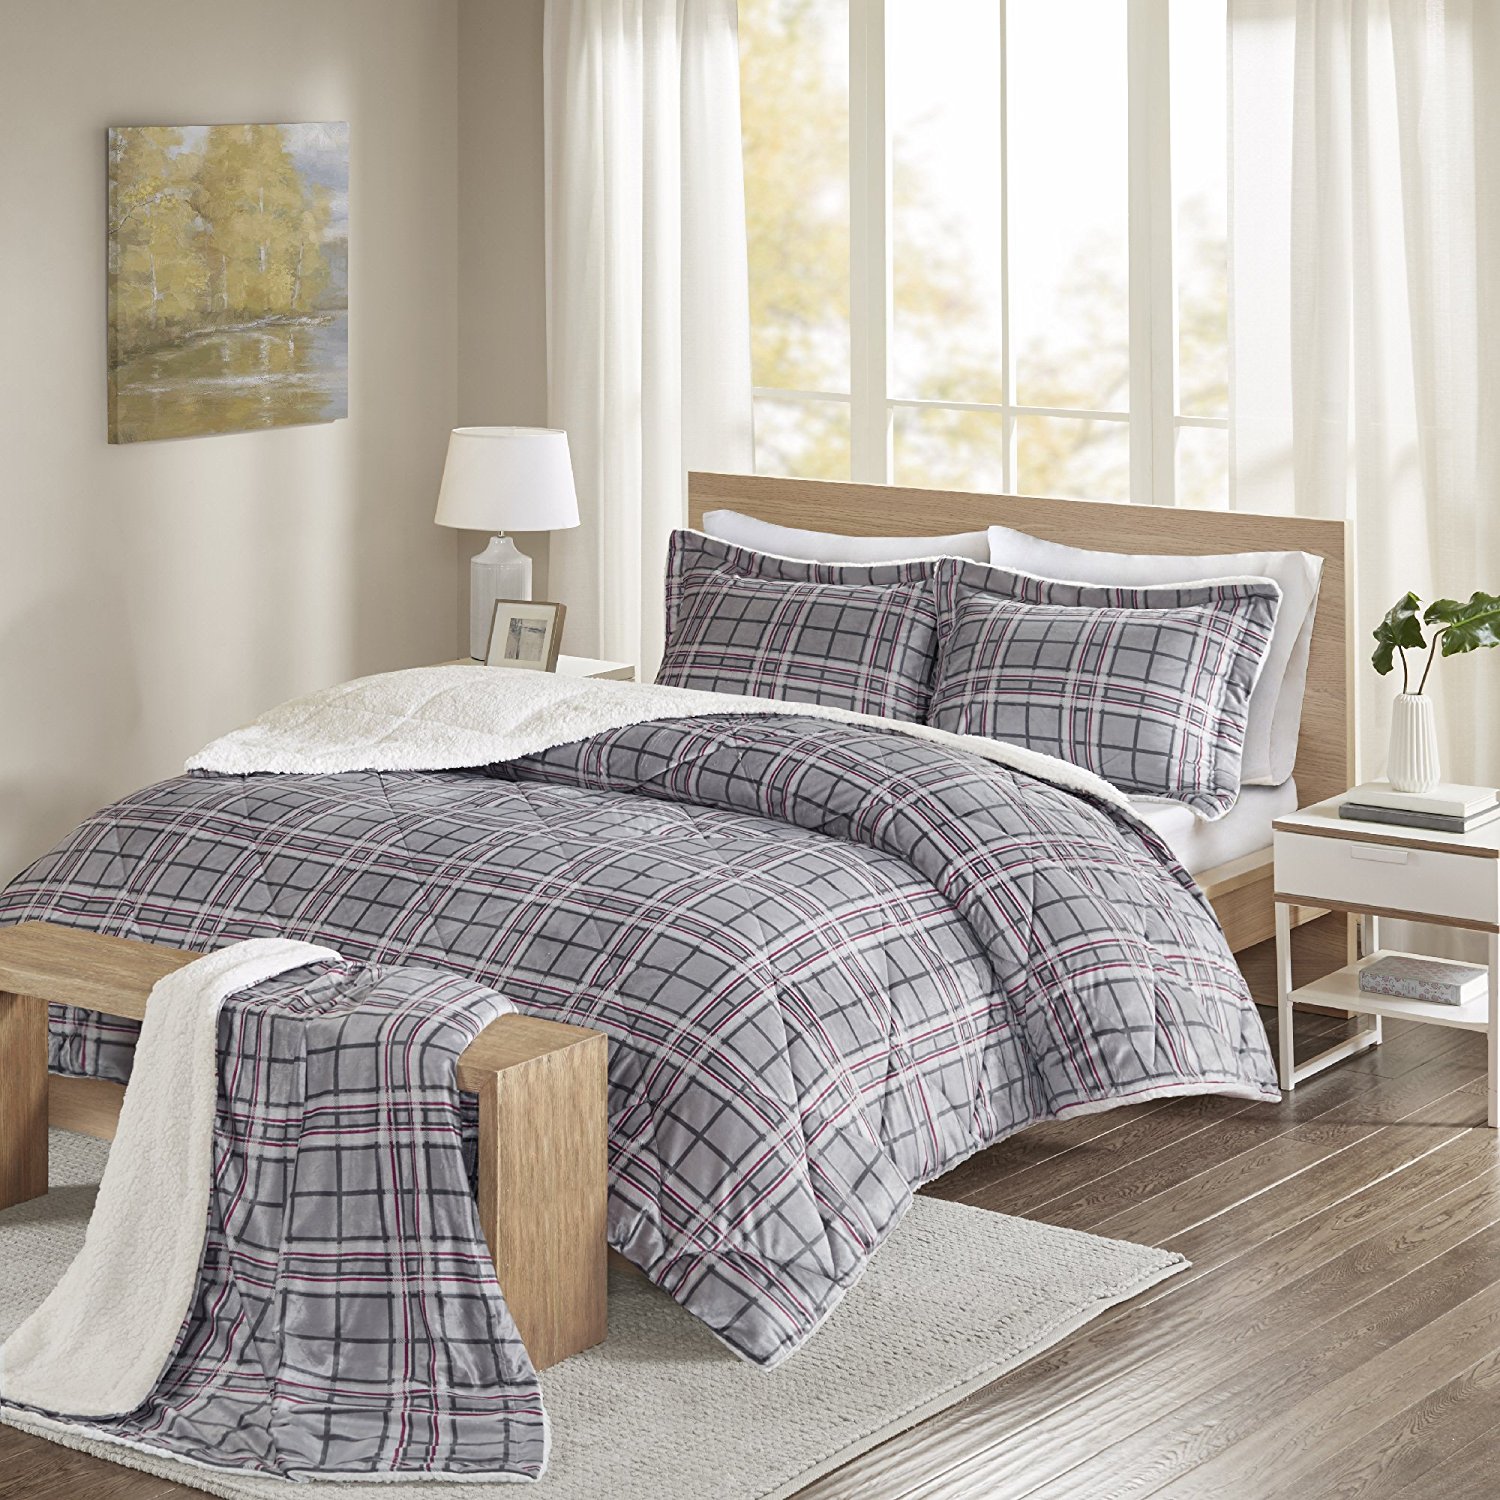 3-piece king and queen Sherpa comforter sets with bonus throw for $30